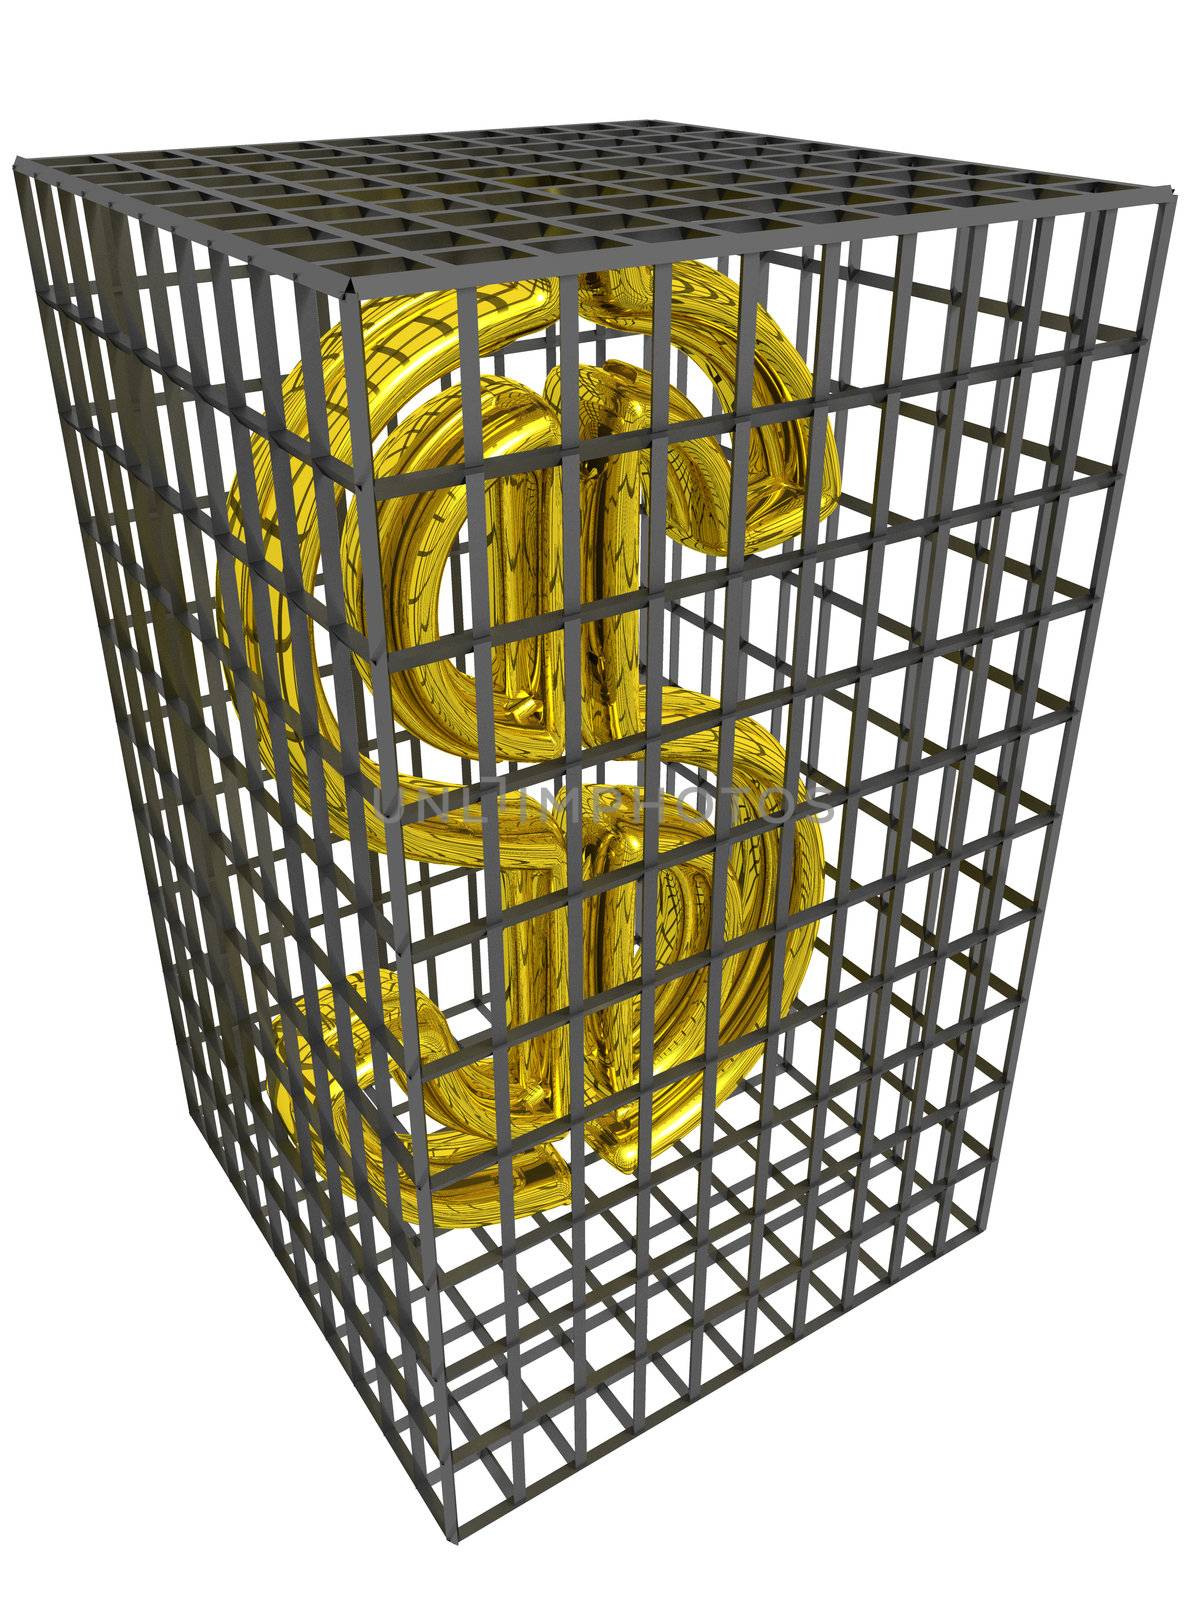 Gold dollar in a steel cage. by gkuna